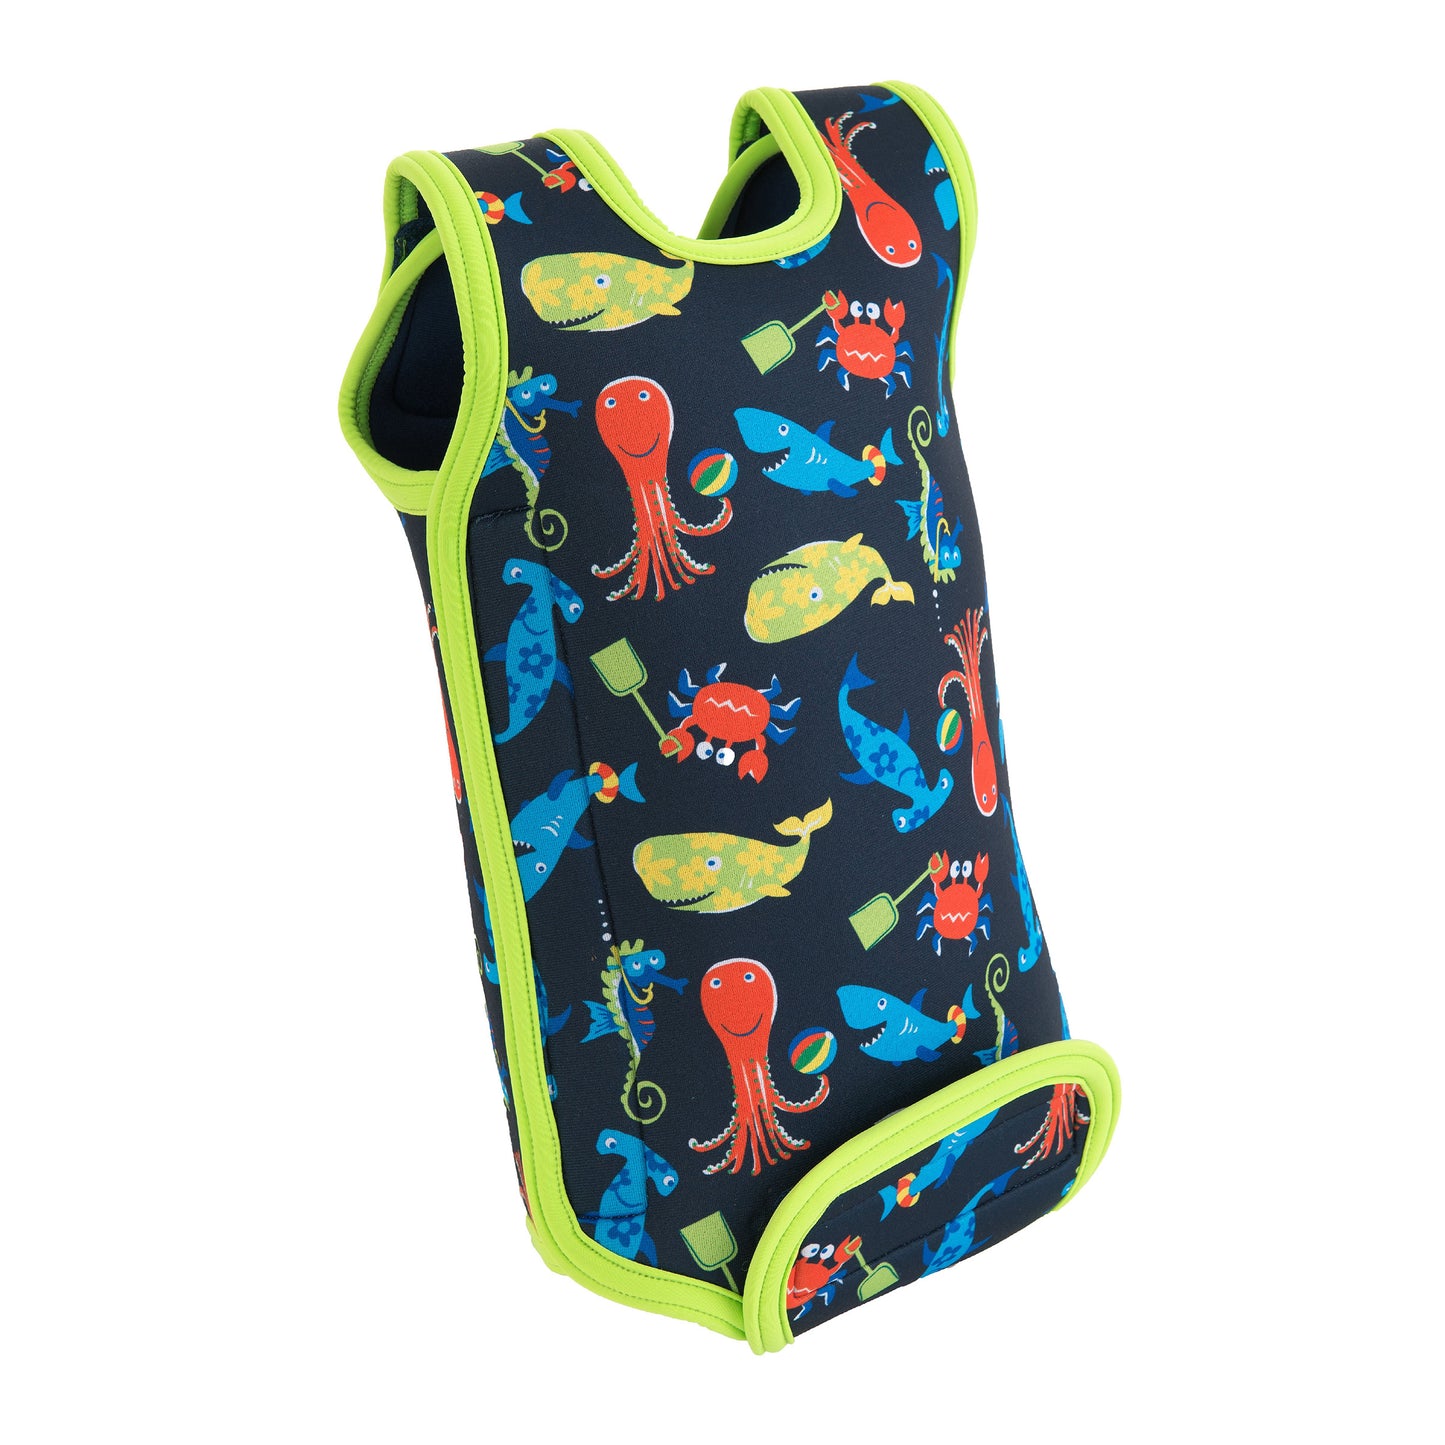 Konfidence "Babywarma" wet suit, baby 0-24 months